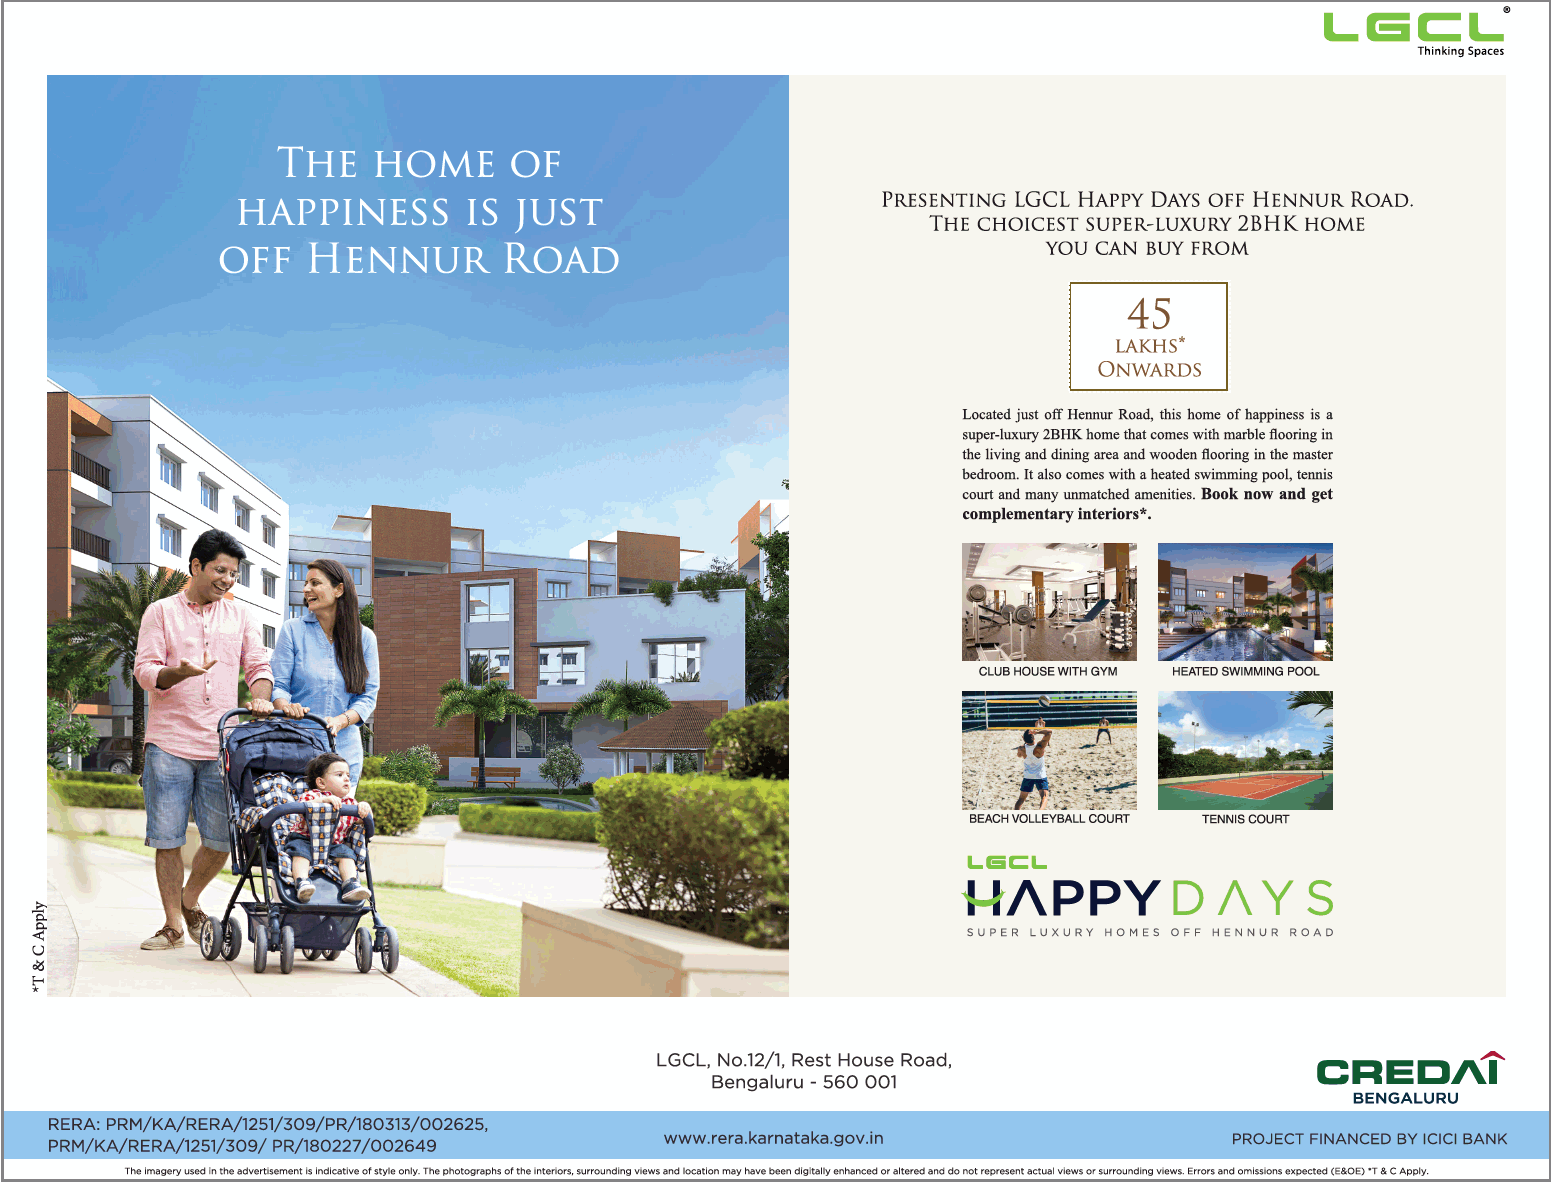 Book 2 BHK home  starting at Rs 45 Lakhs at LGCL Happy Days, Bangalore Update